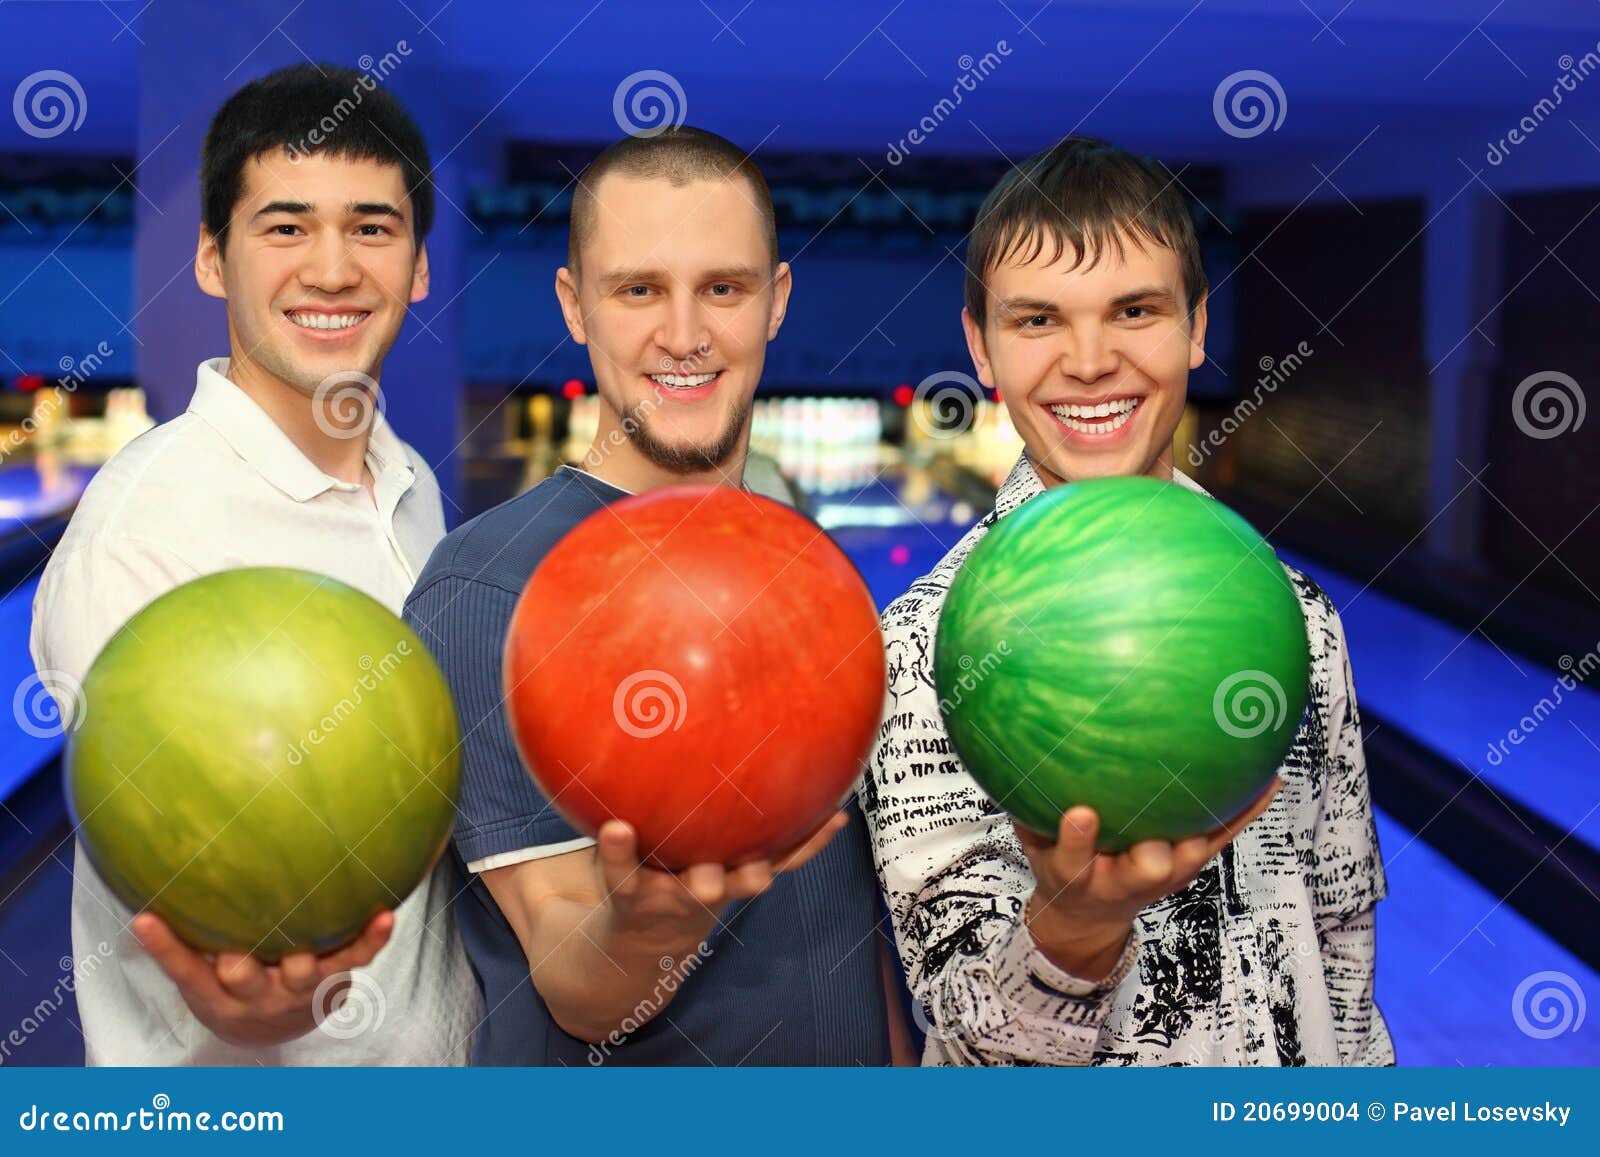 friends stand alongside and hold balls for bowling